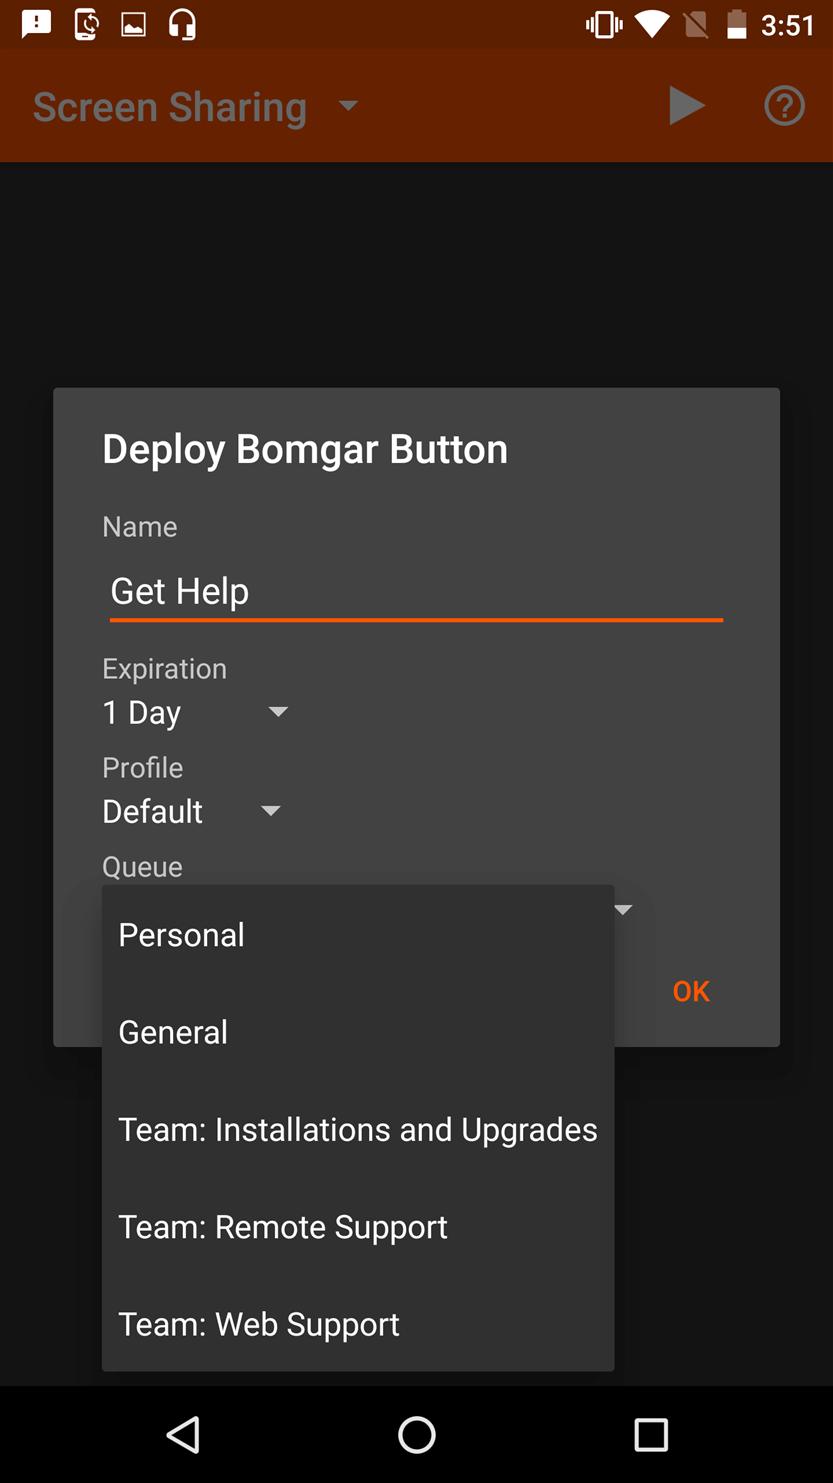 Once the Bomgar Button is deployed, your customer can use it to directly enter the queue